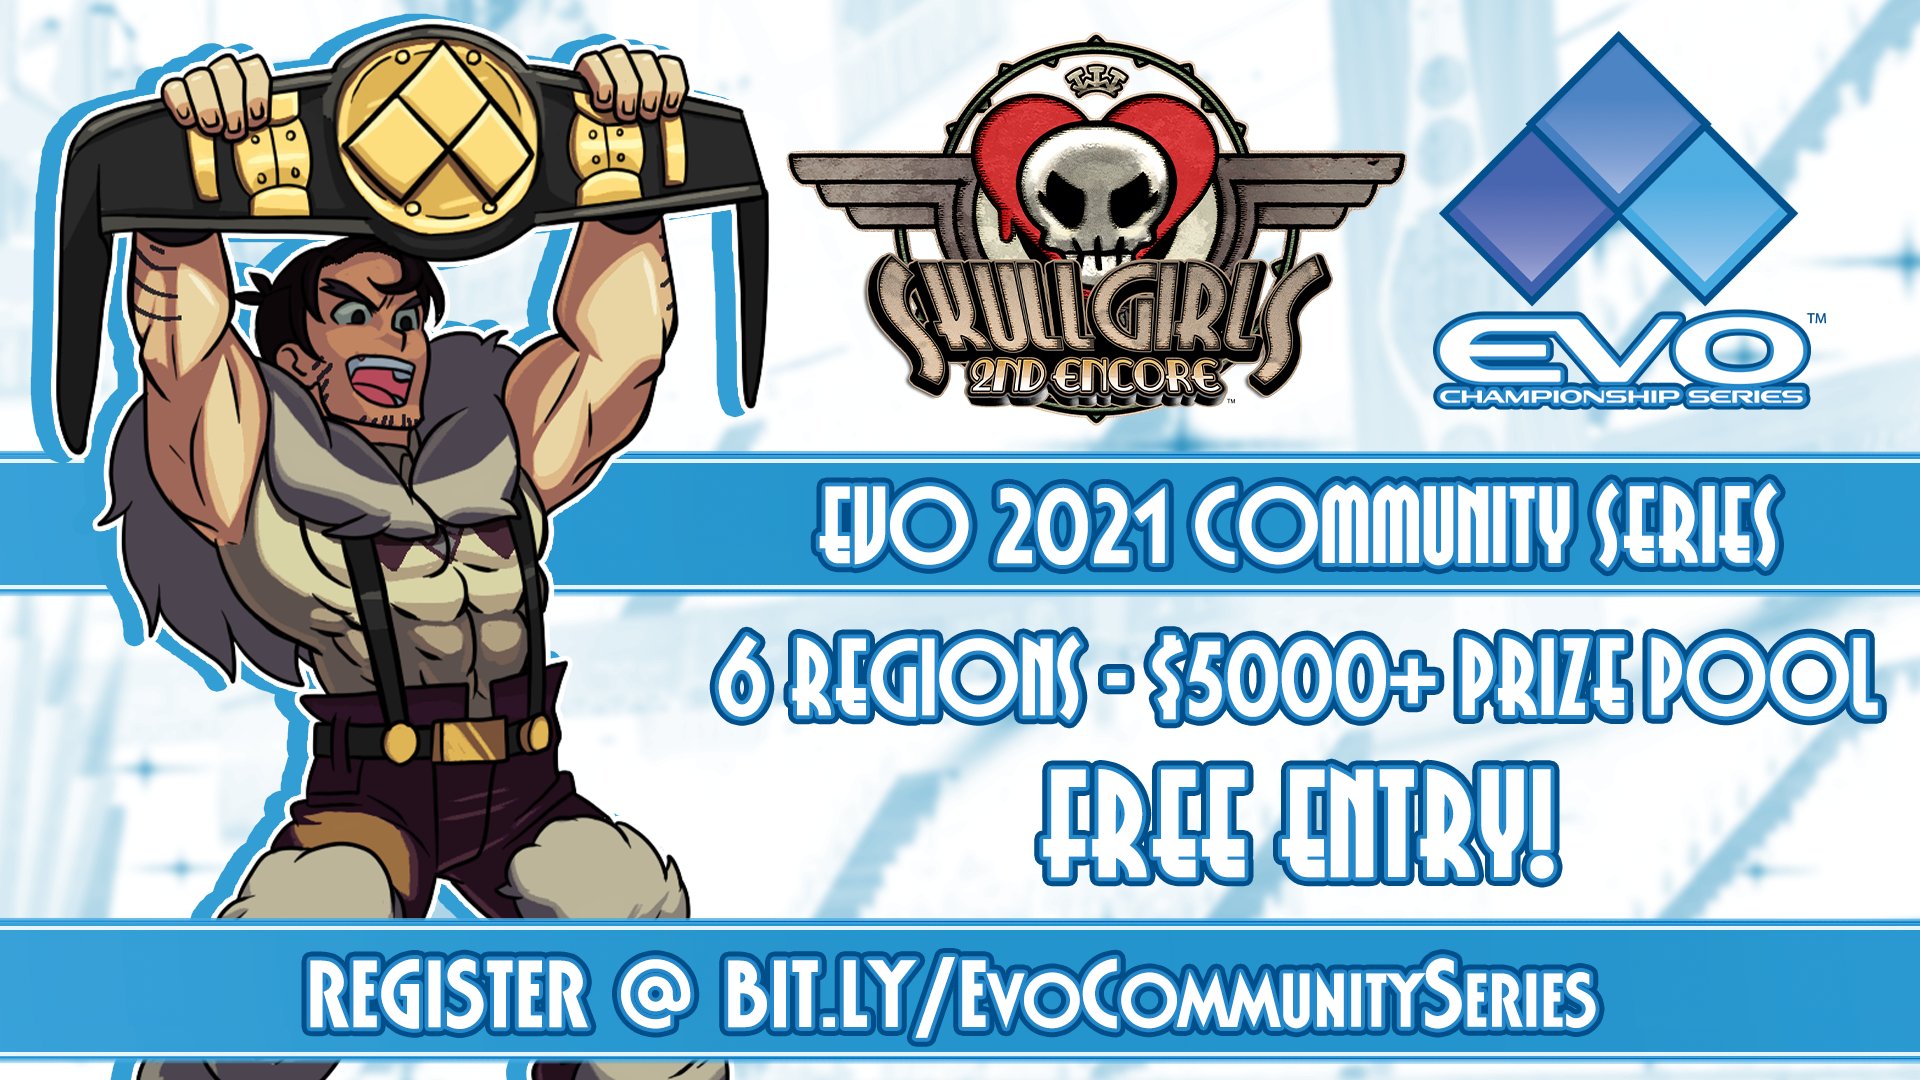 Skullgirls Skullgirls 2nd Encore For Ps4 Is A Featured Event In The Evo 21 Community Series Split Across 6 Regions With A Prize Pool Of Over 5000 Entry Is Completely